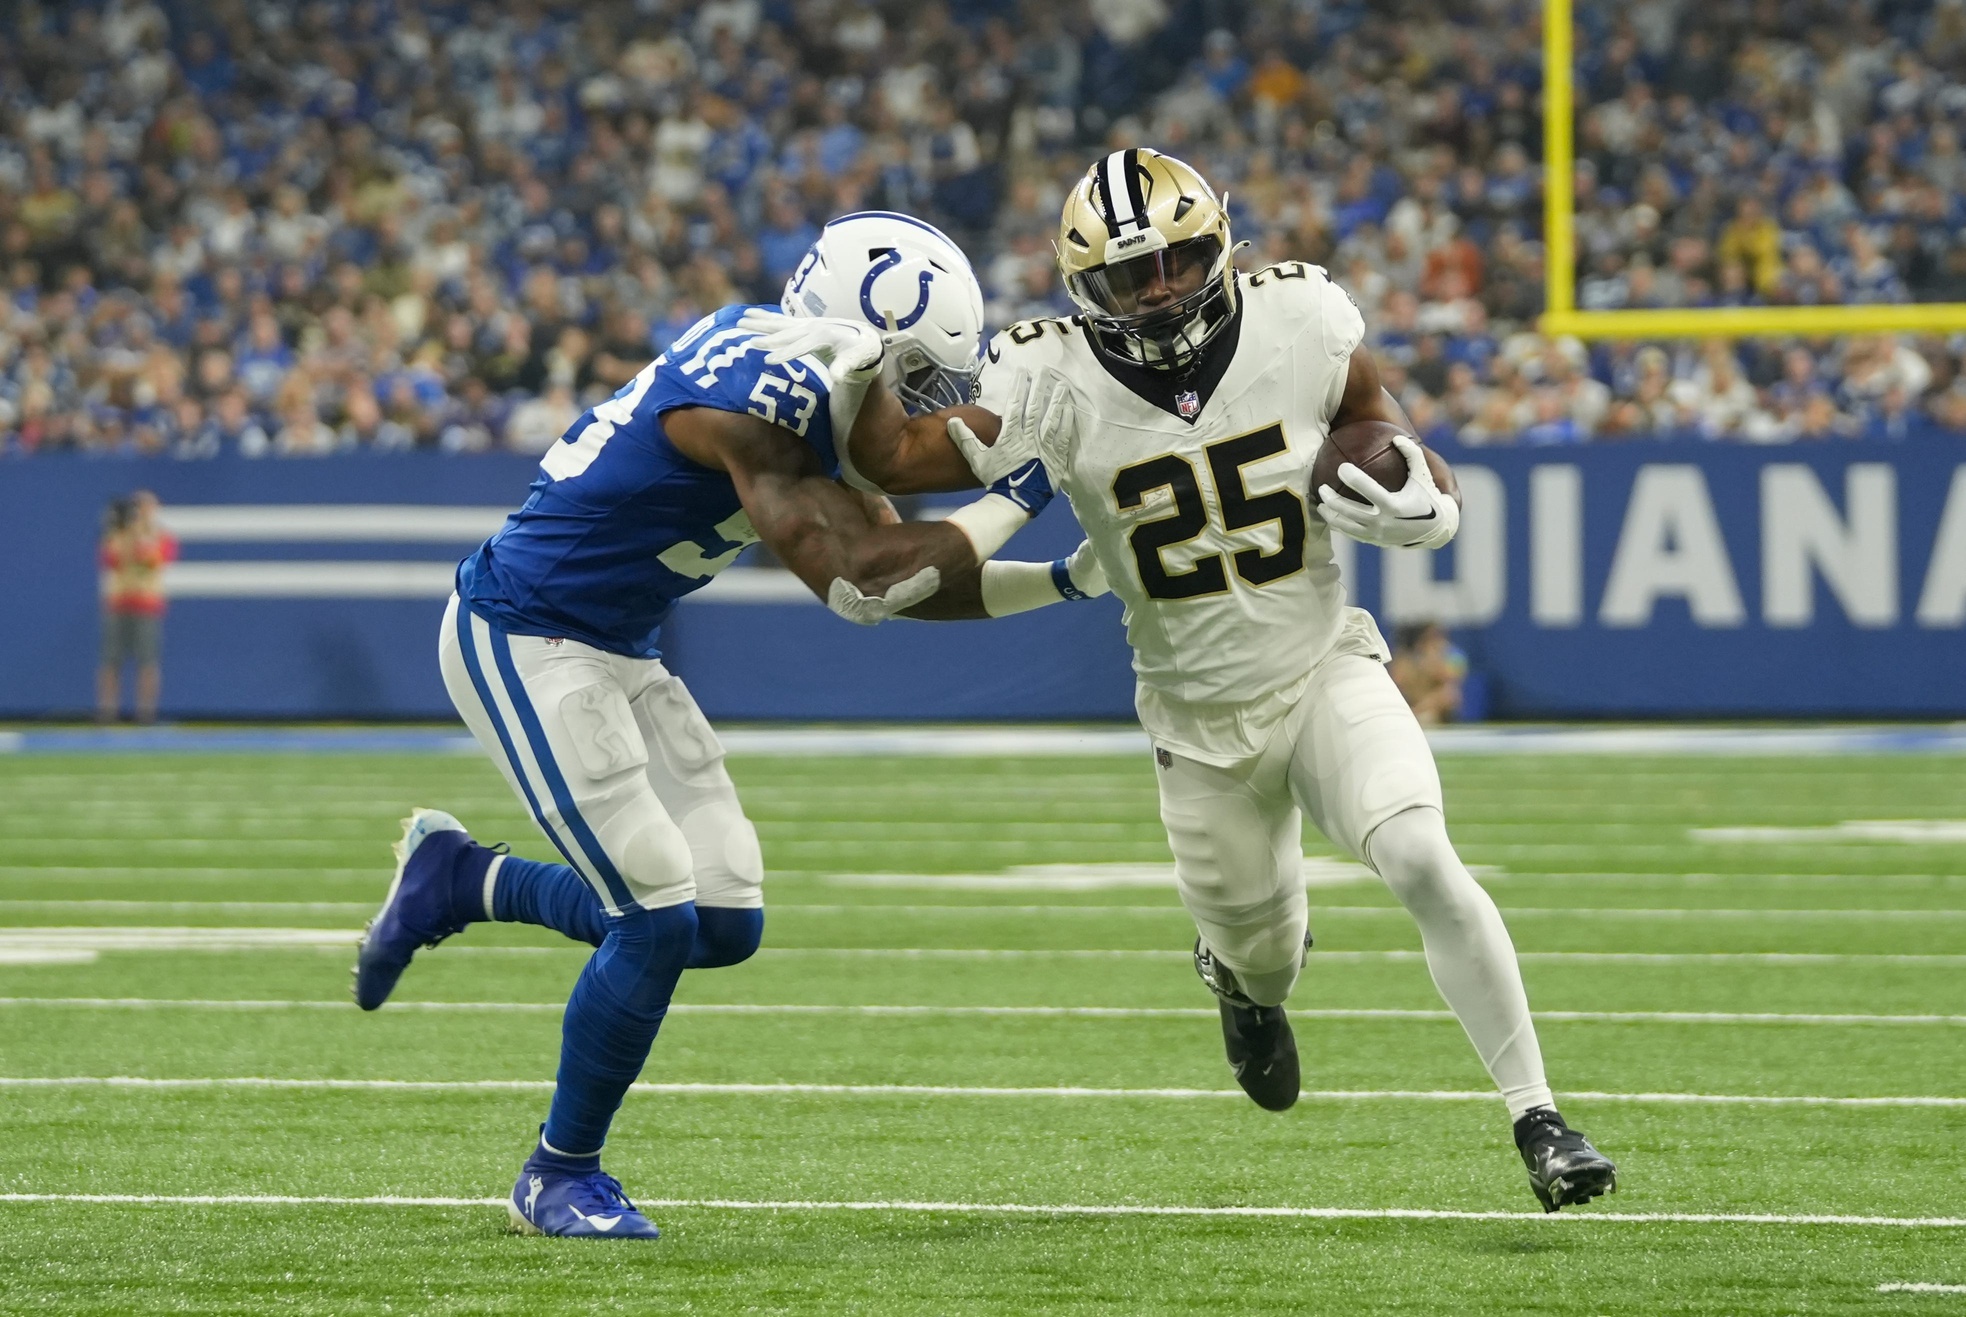 Indianapolis Colts linebacker Shaquille Leonard (53) tries to tackle New Orleans Saints running back Kendre Miller (25). © Clark Wade/IndyStar / USA TODAY NETWORK